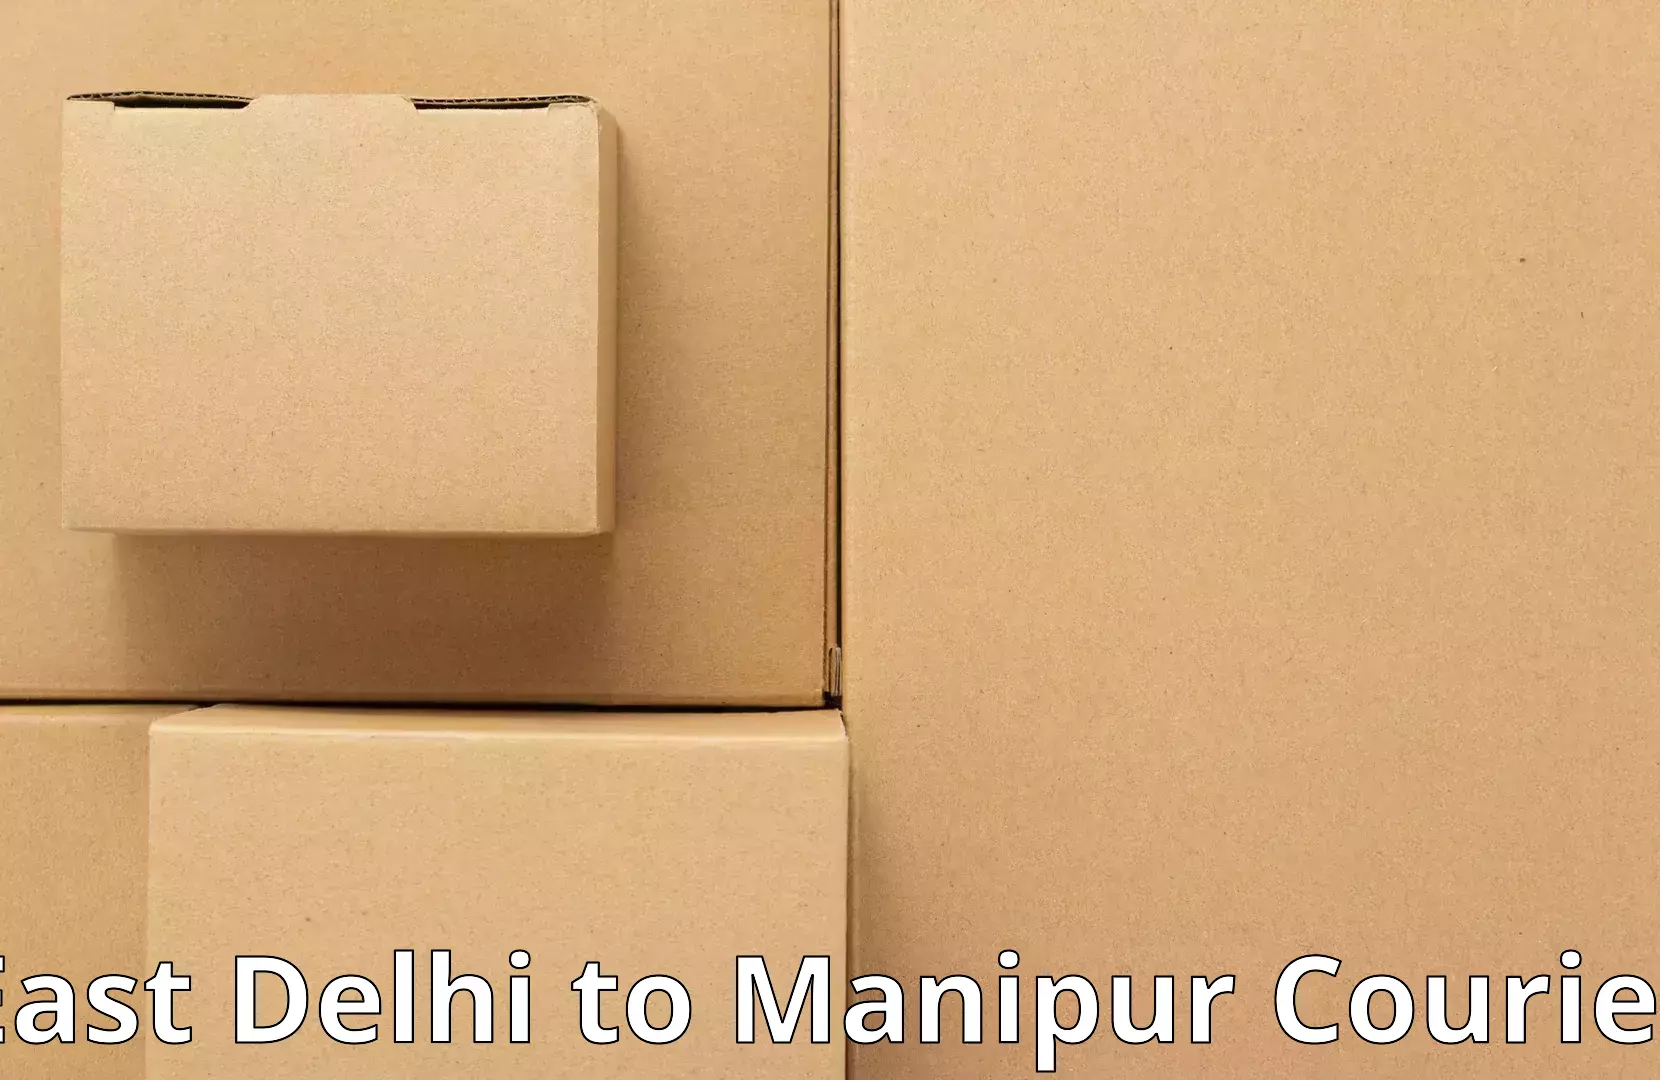 Furniture delivery service East Delhi to Manipur